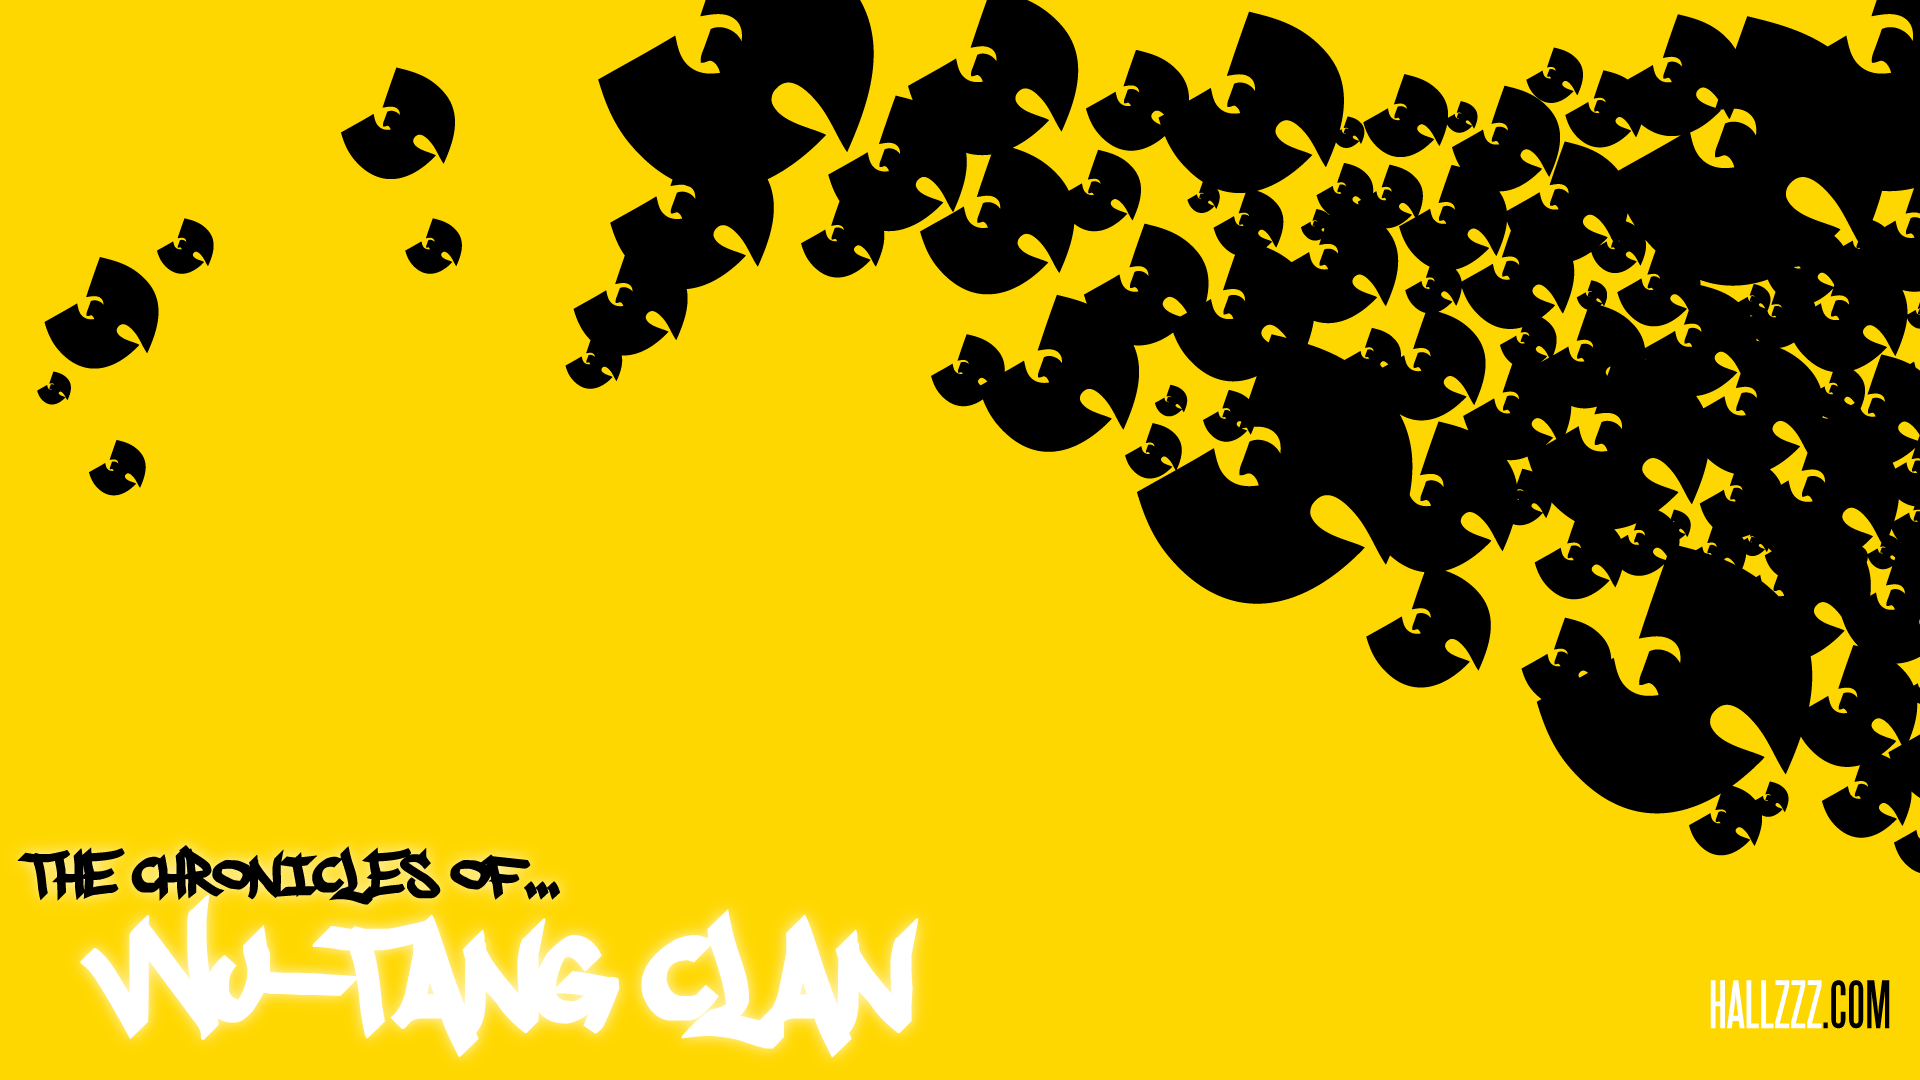 Top Wu Tang Bees Wallpaper Images for Pinterest